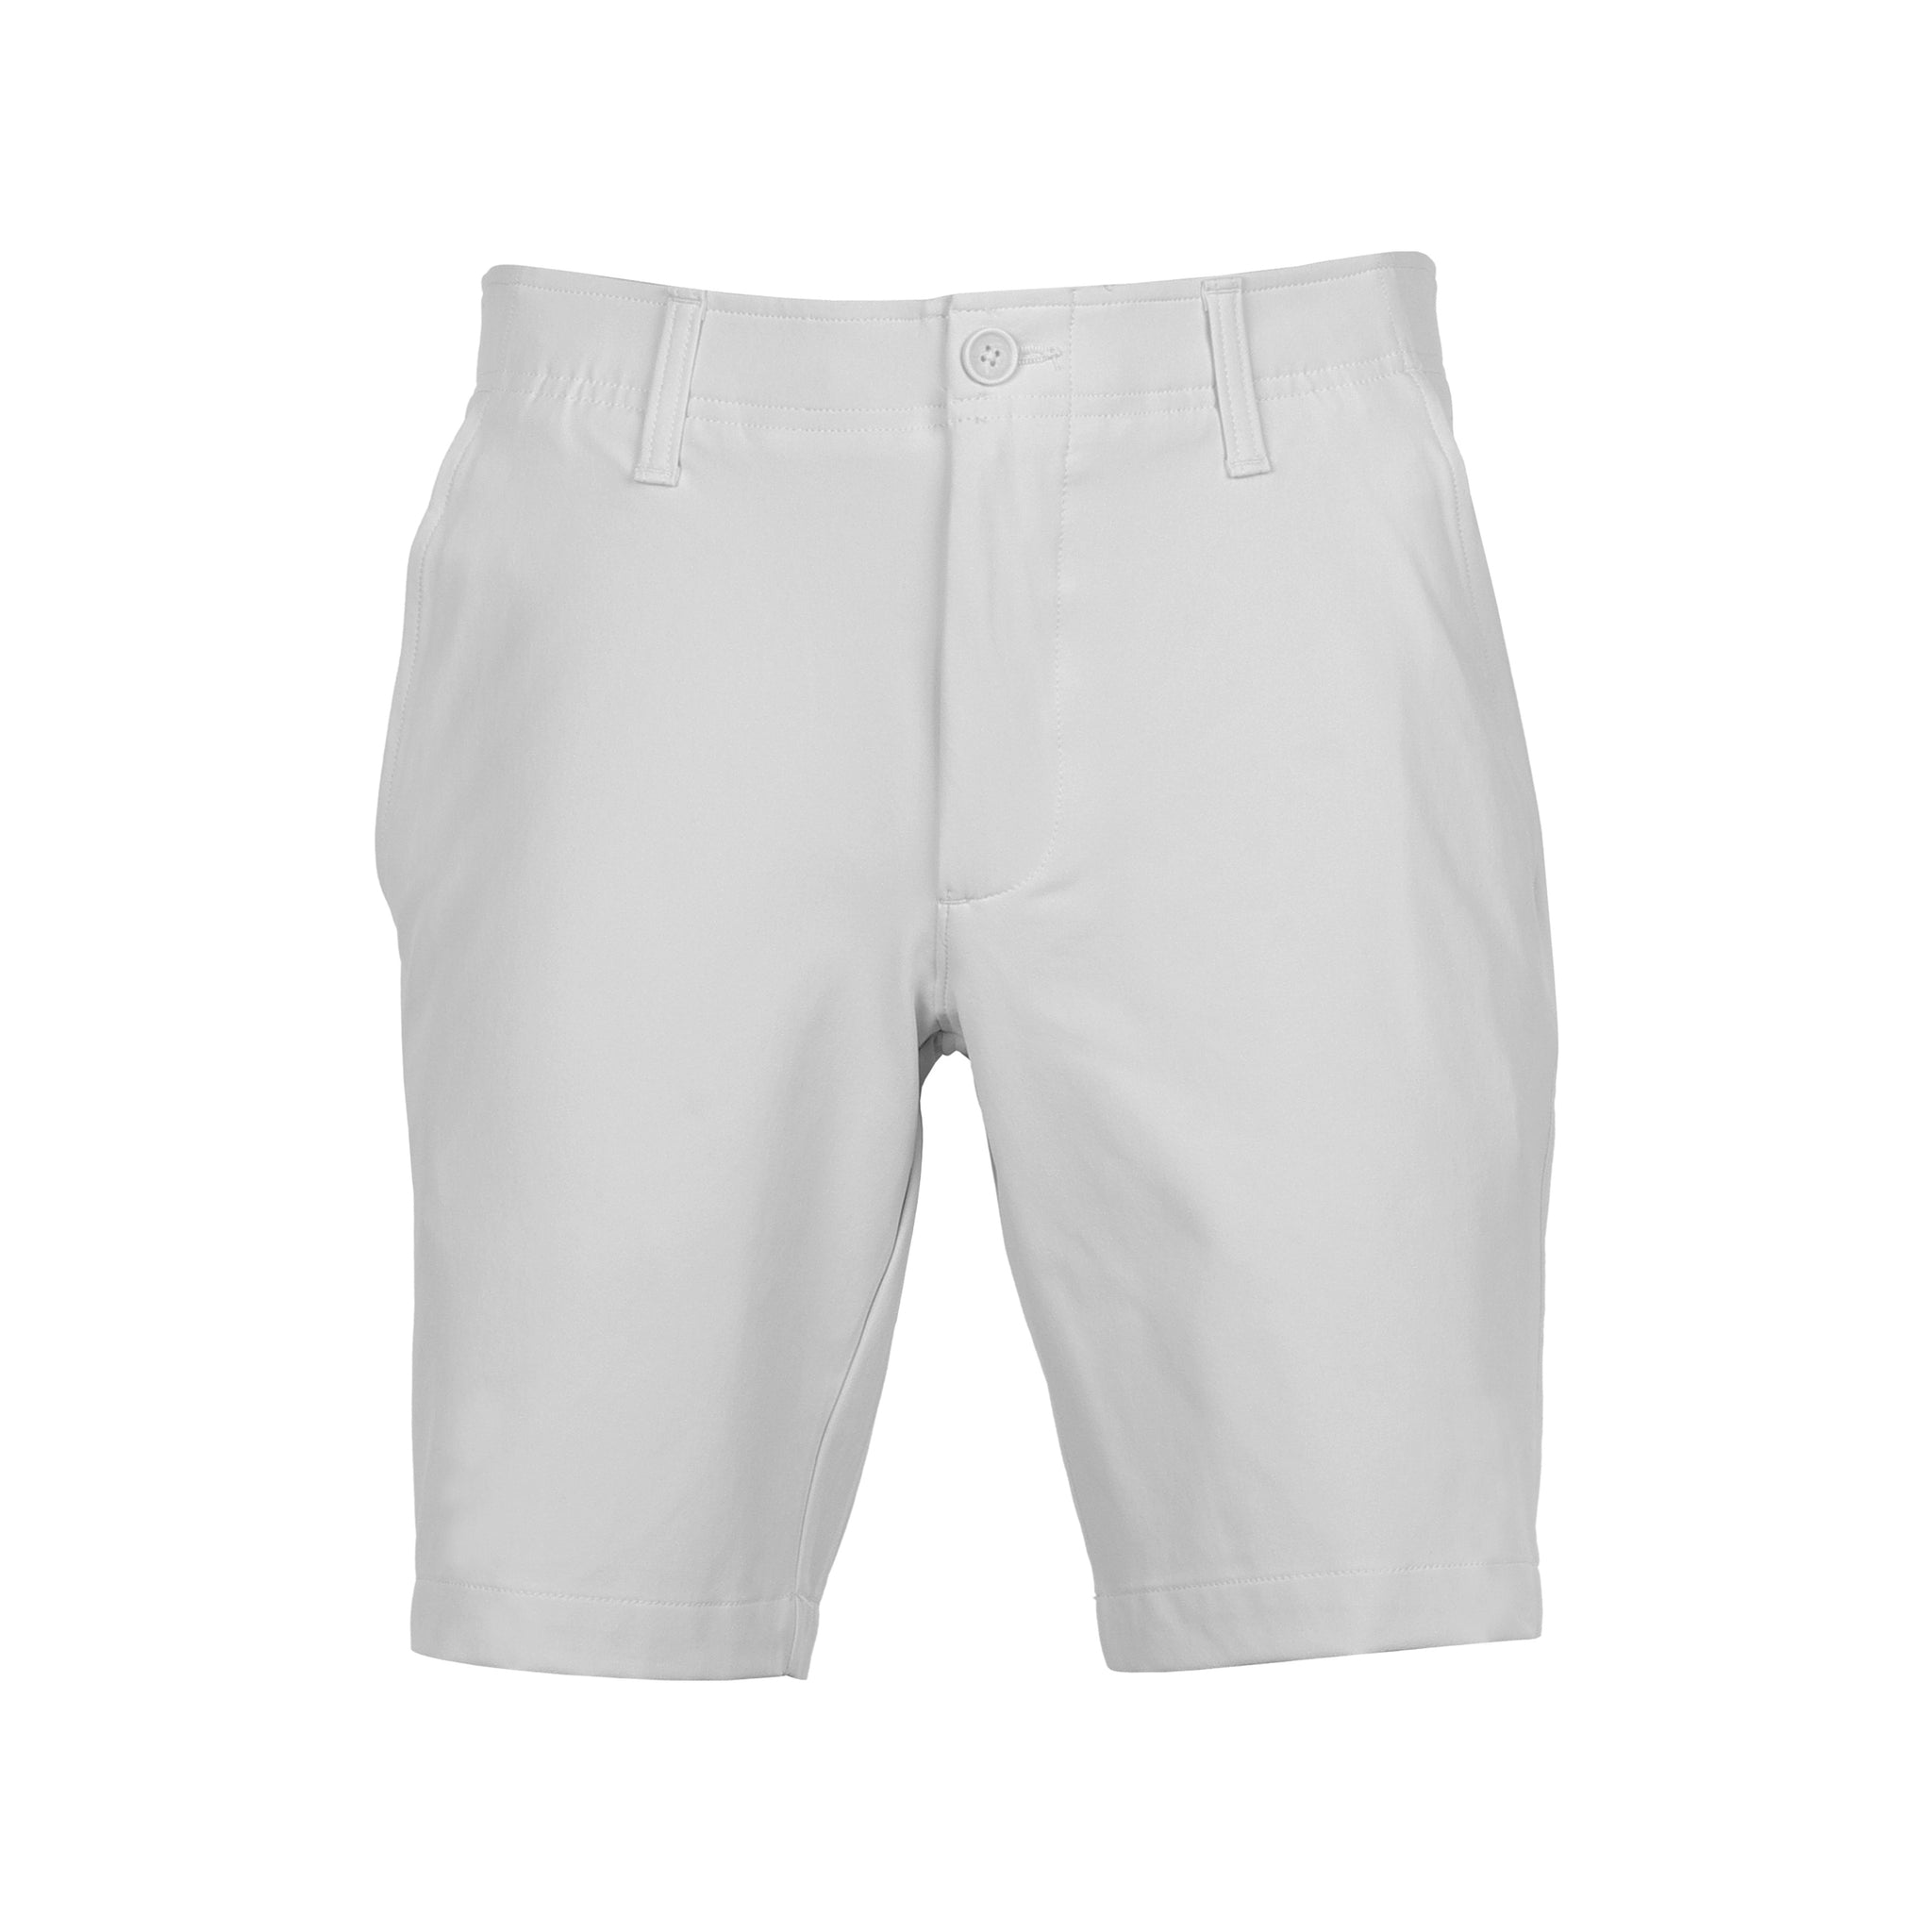 Under Armour Golf Drive Tapered Shorts 1384467 Halo Grey 014 & Function18